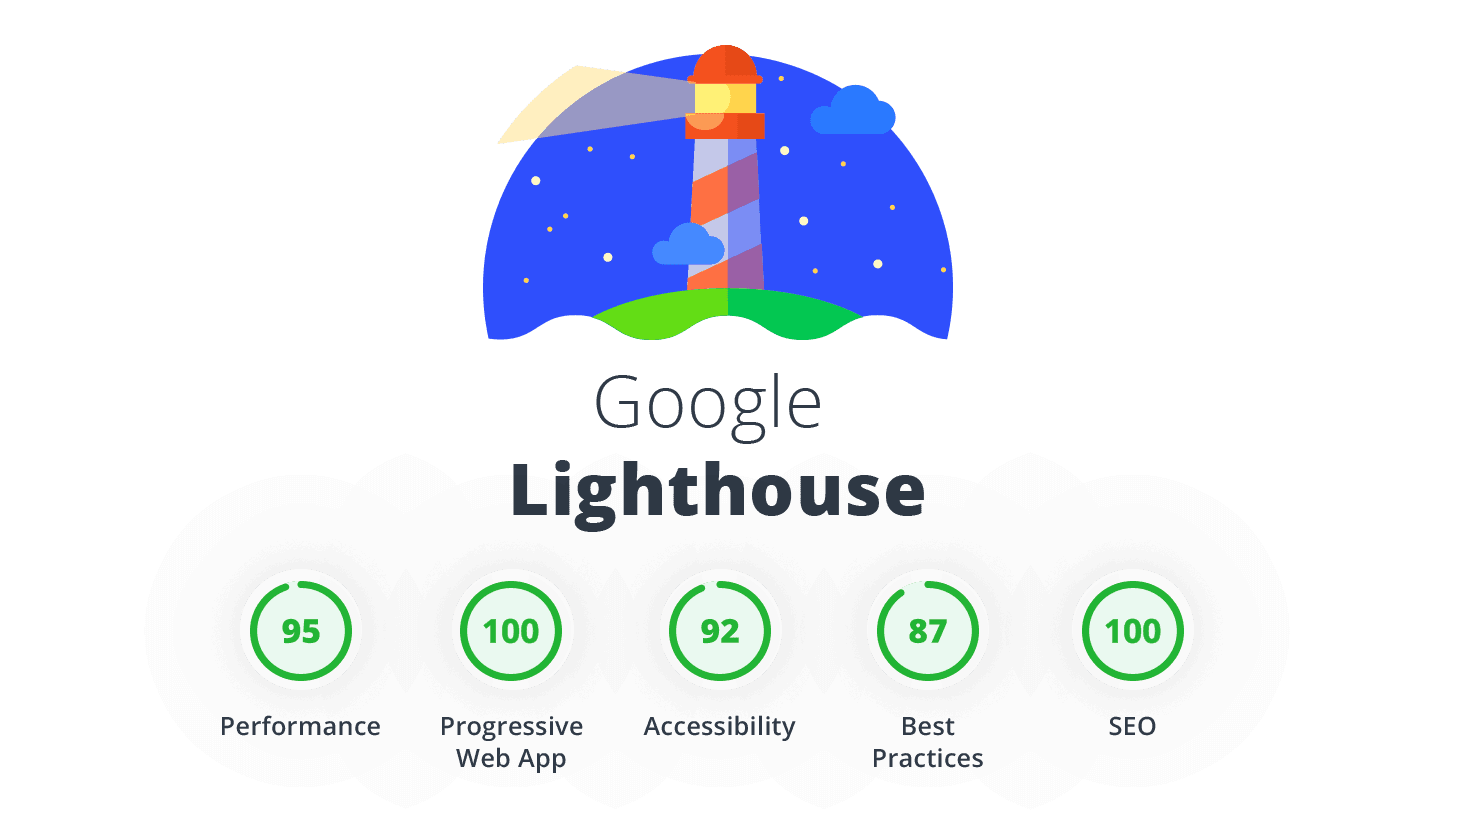 Google-Lighthouse-featured-image.png